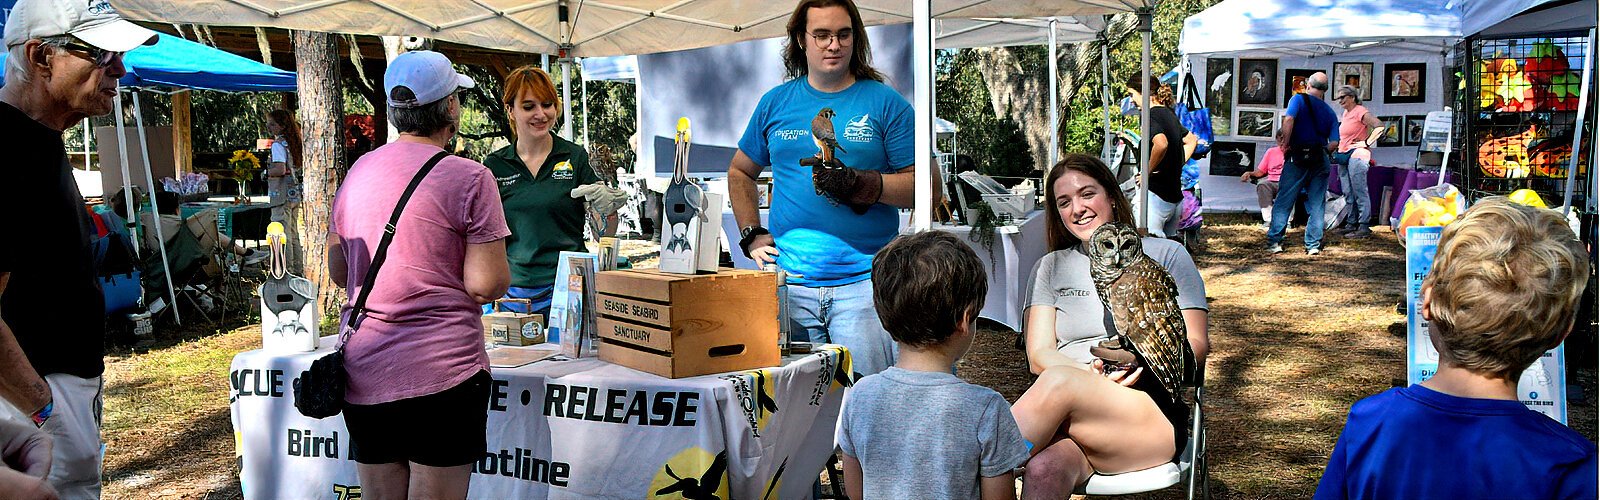 The wildlife rehabilitation facility Seaside Seabird Sanctuary educates festival goers with Mikaella and barred owl Pacino, Daniel with American kestrel Kevin and Keegan with screech-owl Rufous.